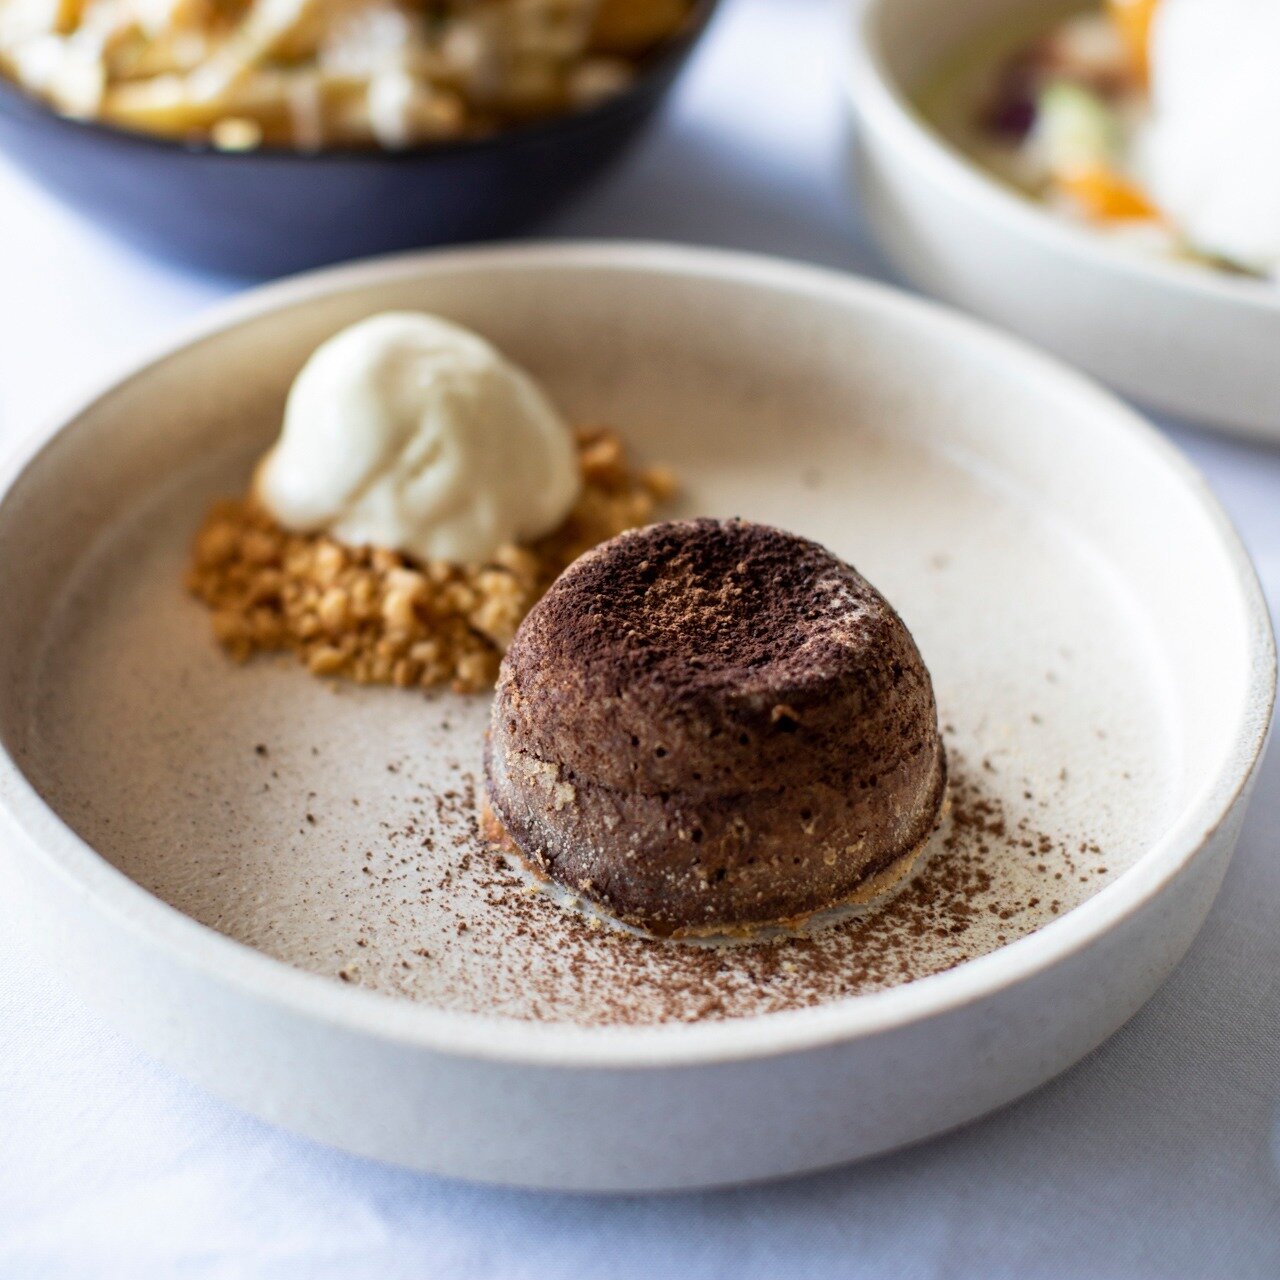 A TASTE OF PURE HAPPINESS

Every moment is a bite of pure bliss with our decadent Molten callebaut dark chocolate fondant &amp; malt ice-cream.